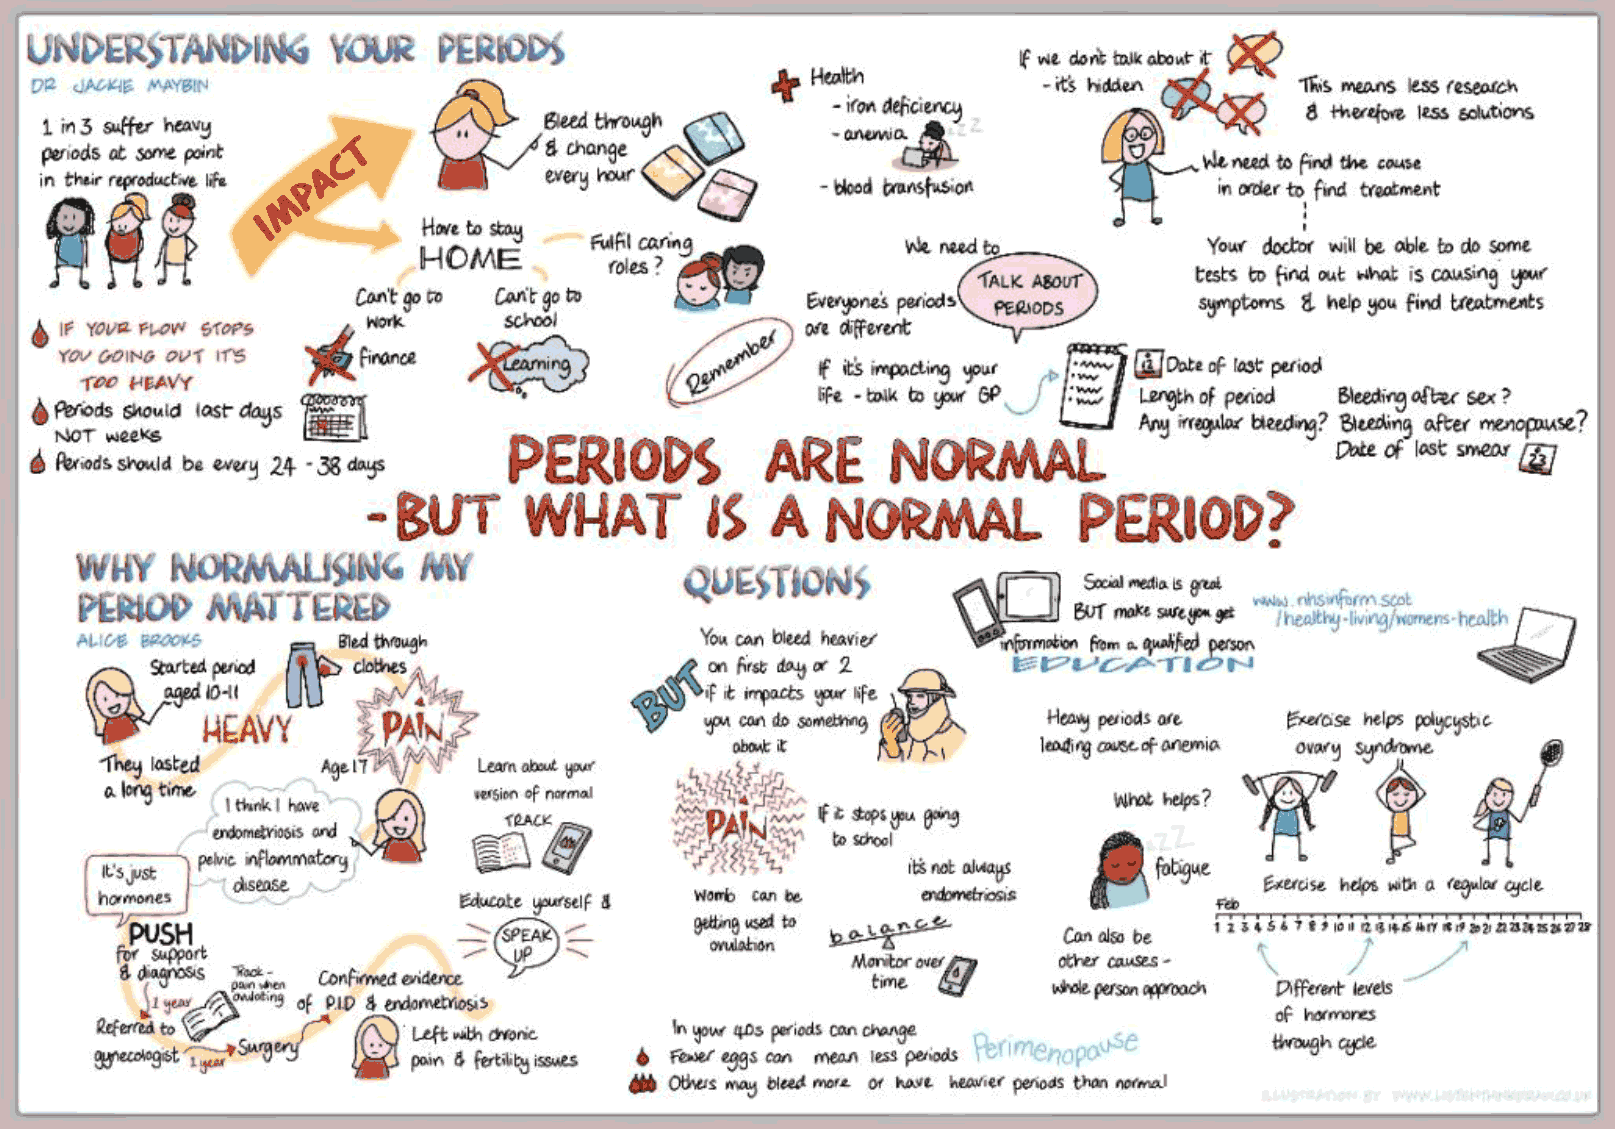 Illustration of the webinar on 'Periods are normal but what is a normal period?'